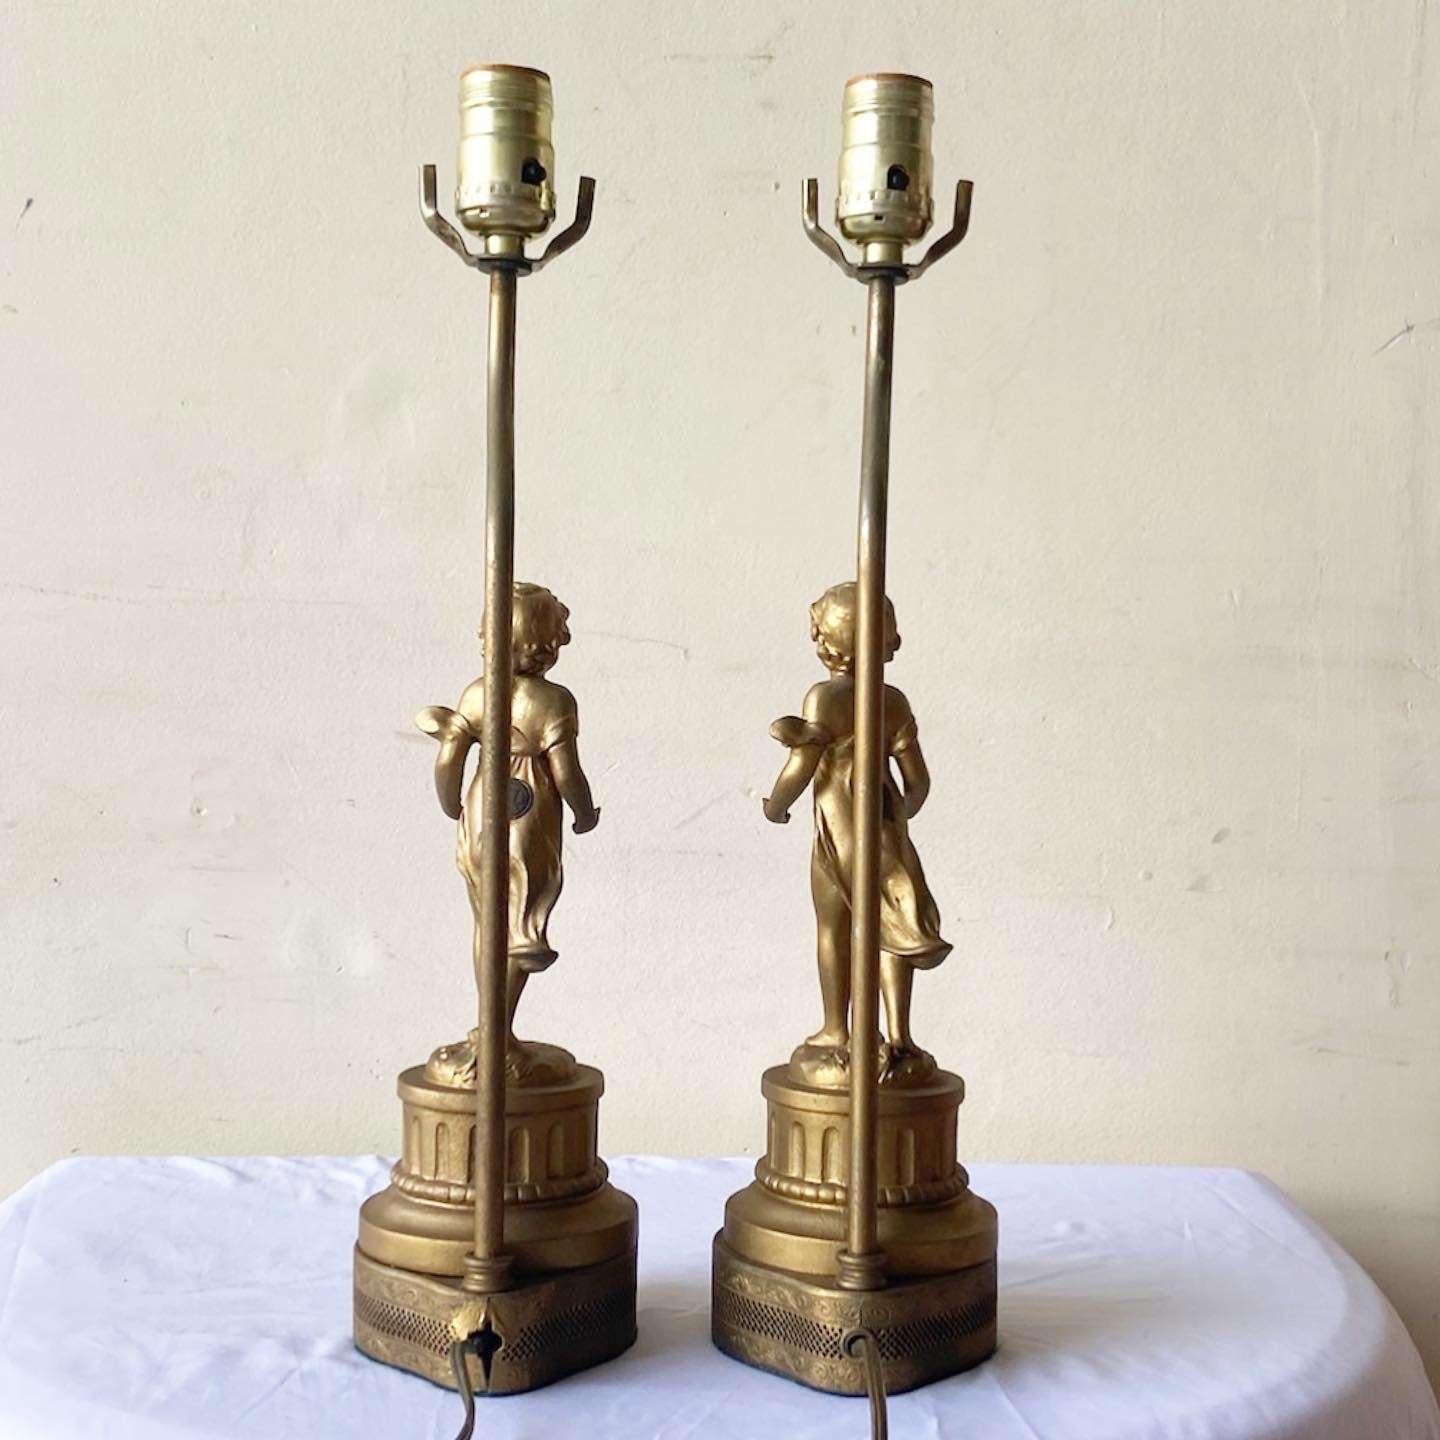 French Gilt Cherub Figural Torch Table Lamps - a Pair For Sale 2